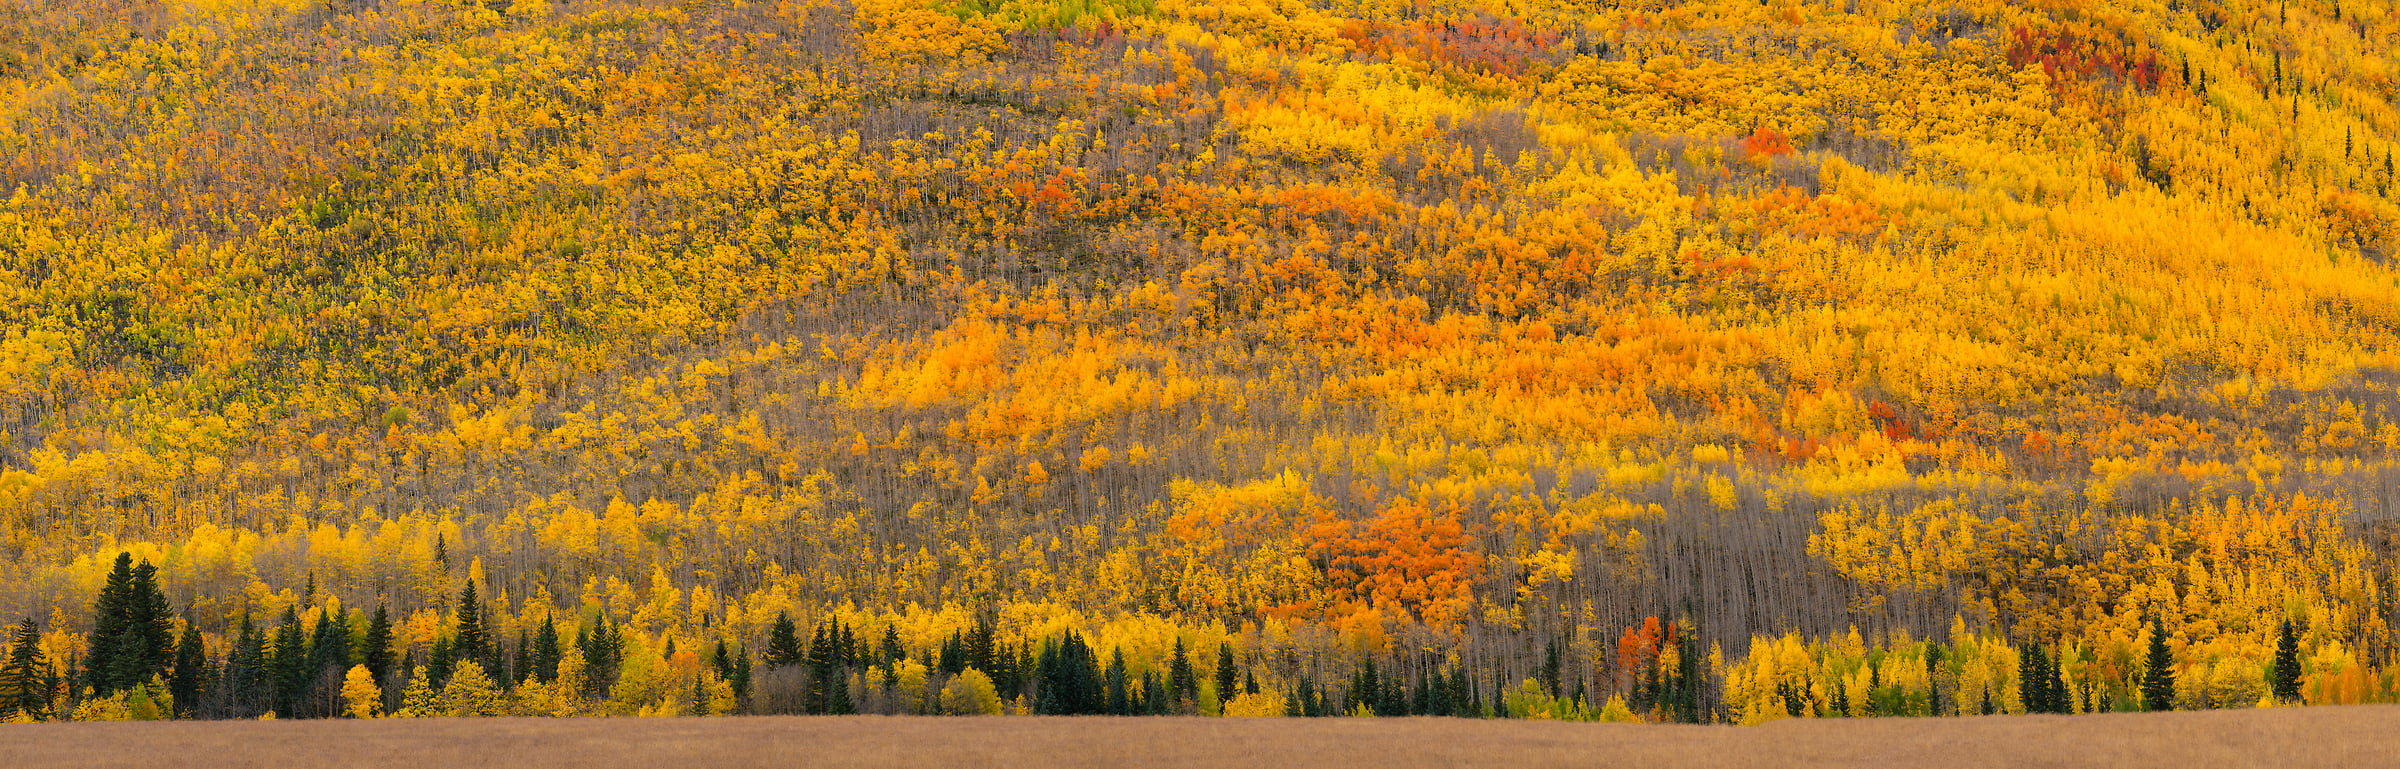 633 megapixels! A very high resolution, wallpaper photo of a hill with autumn foliage of aspen trees; photograph created by Jeff Lewis in Ouray, Colorado